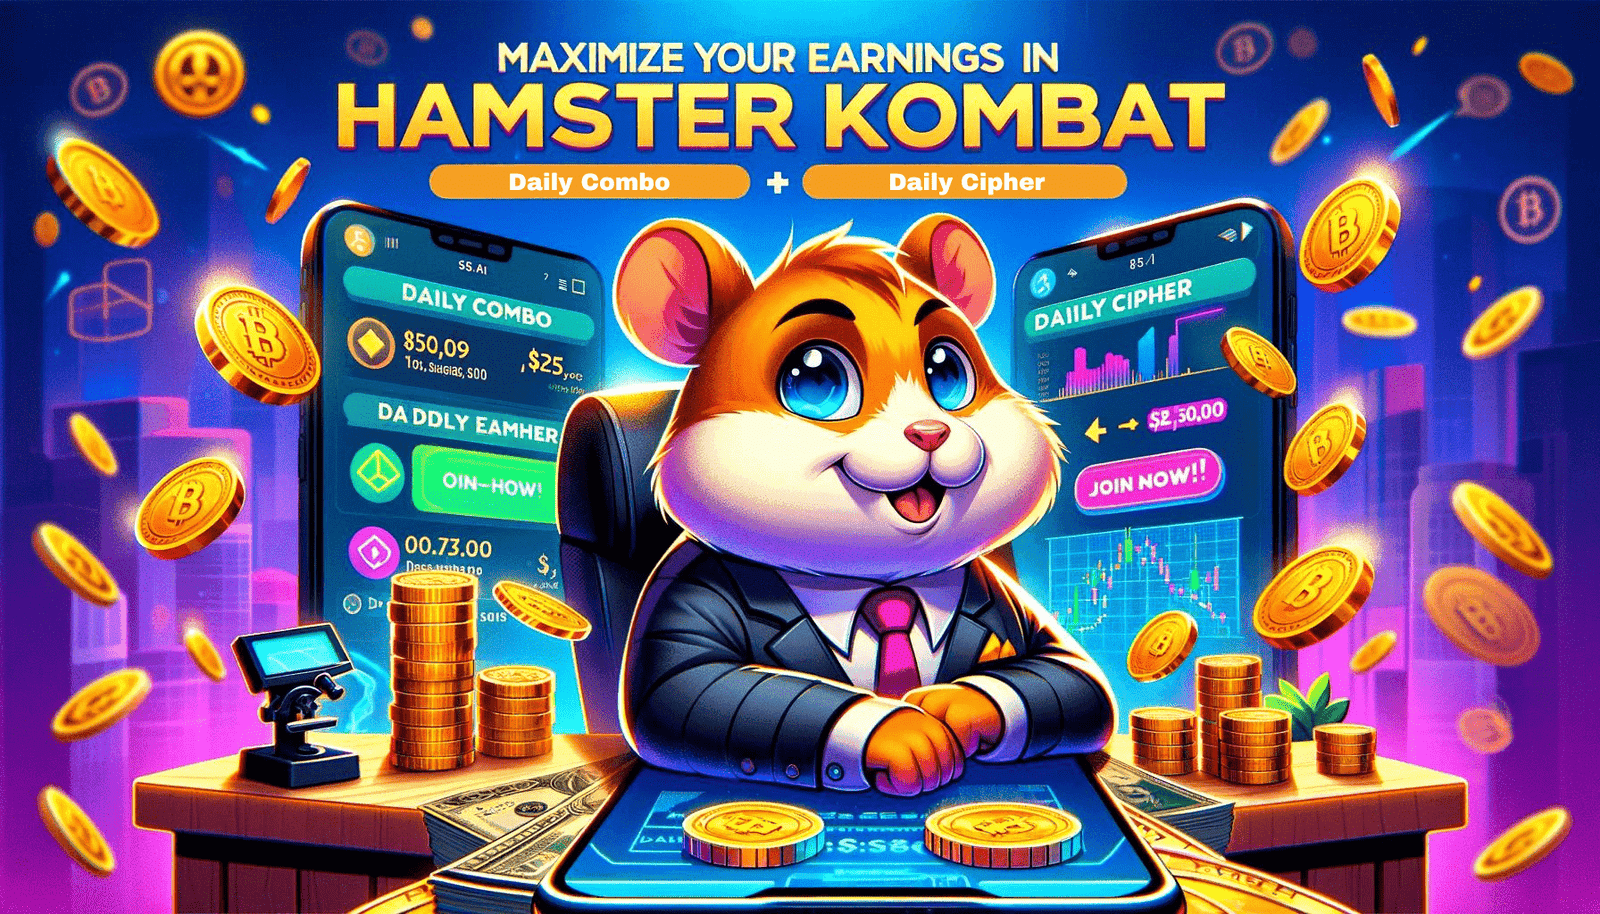 Maximize Your Earnings in Hamster Kombat A Detailed Guide to Daily Combo and Daily Cipher Strategies (1) (1) (1)